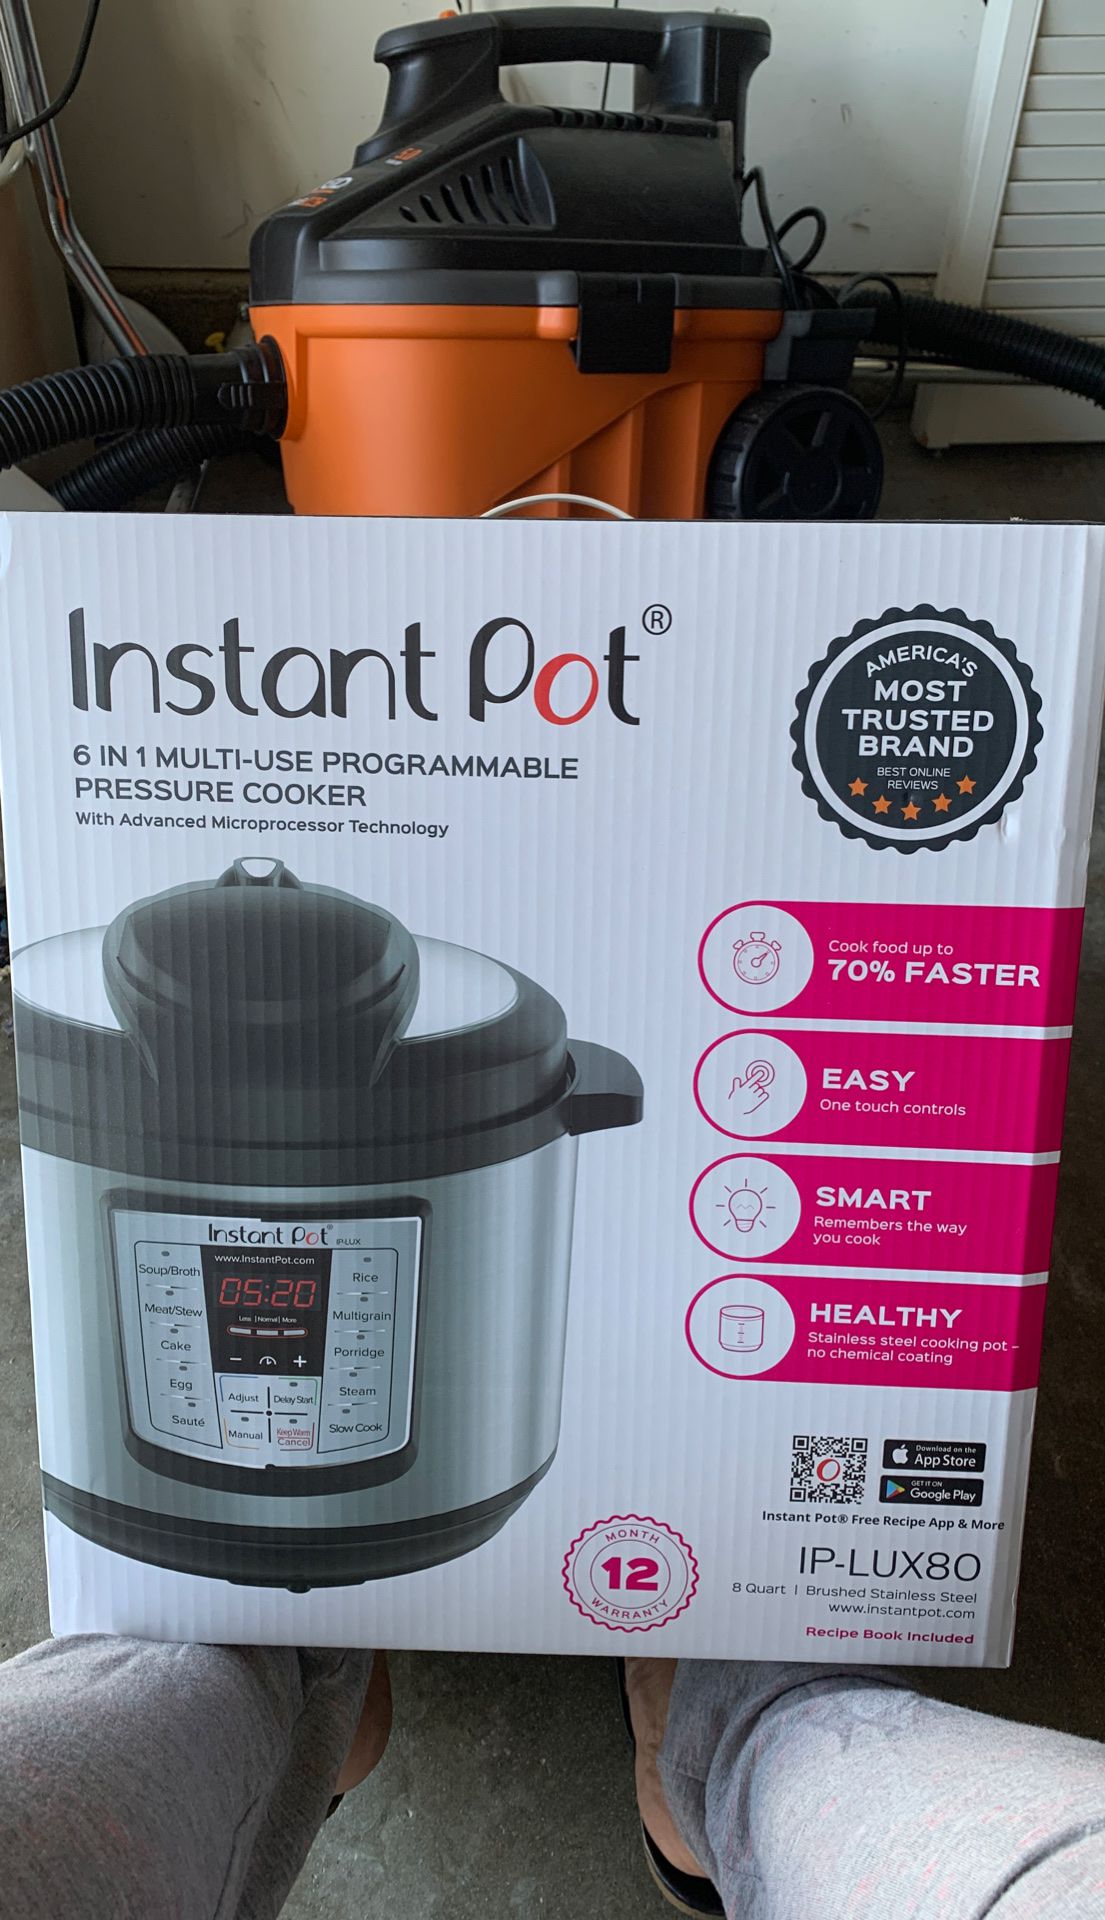 The original InstantPot insta pot 8 quart large size brand new never opened Pressure cooker sauté warmer slow cooker fast cooker Brushed Stainless St